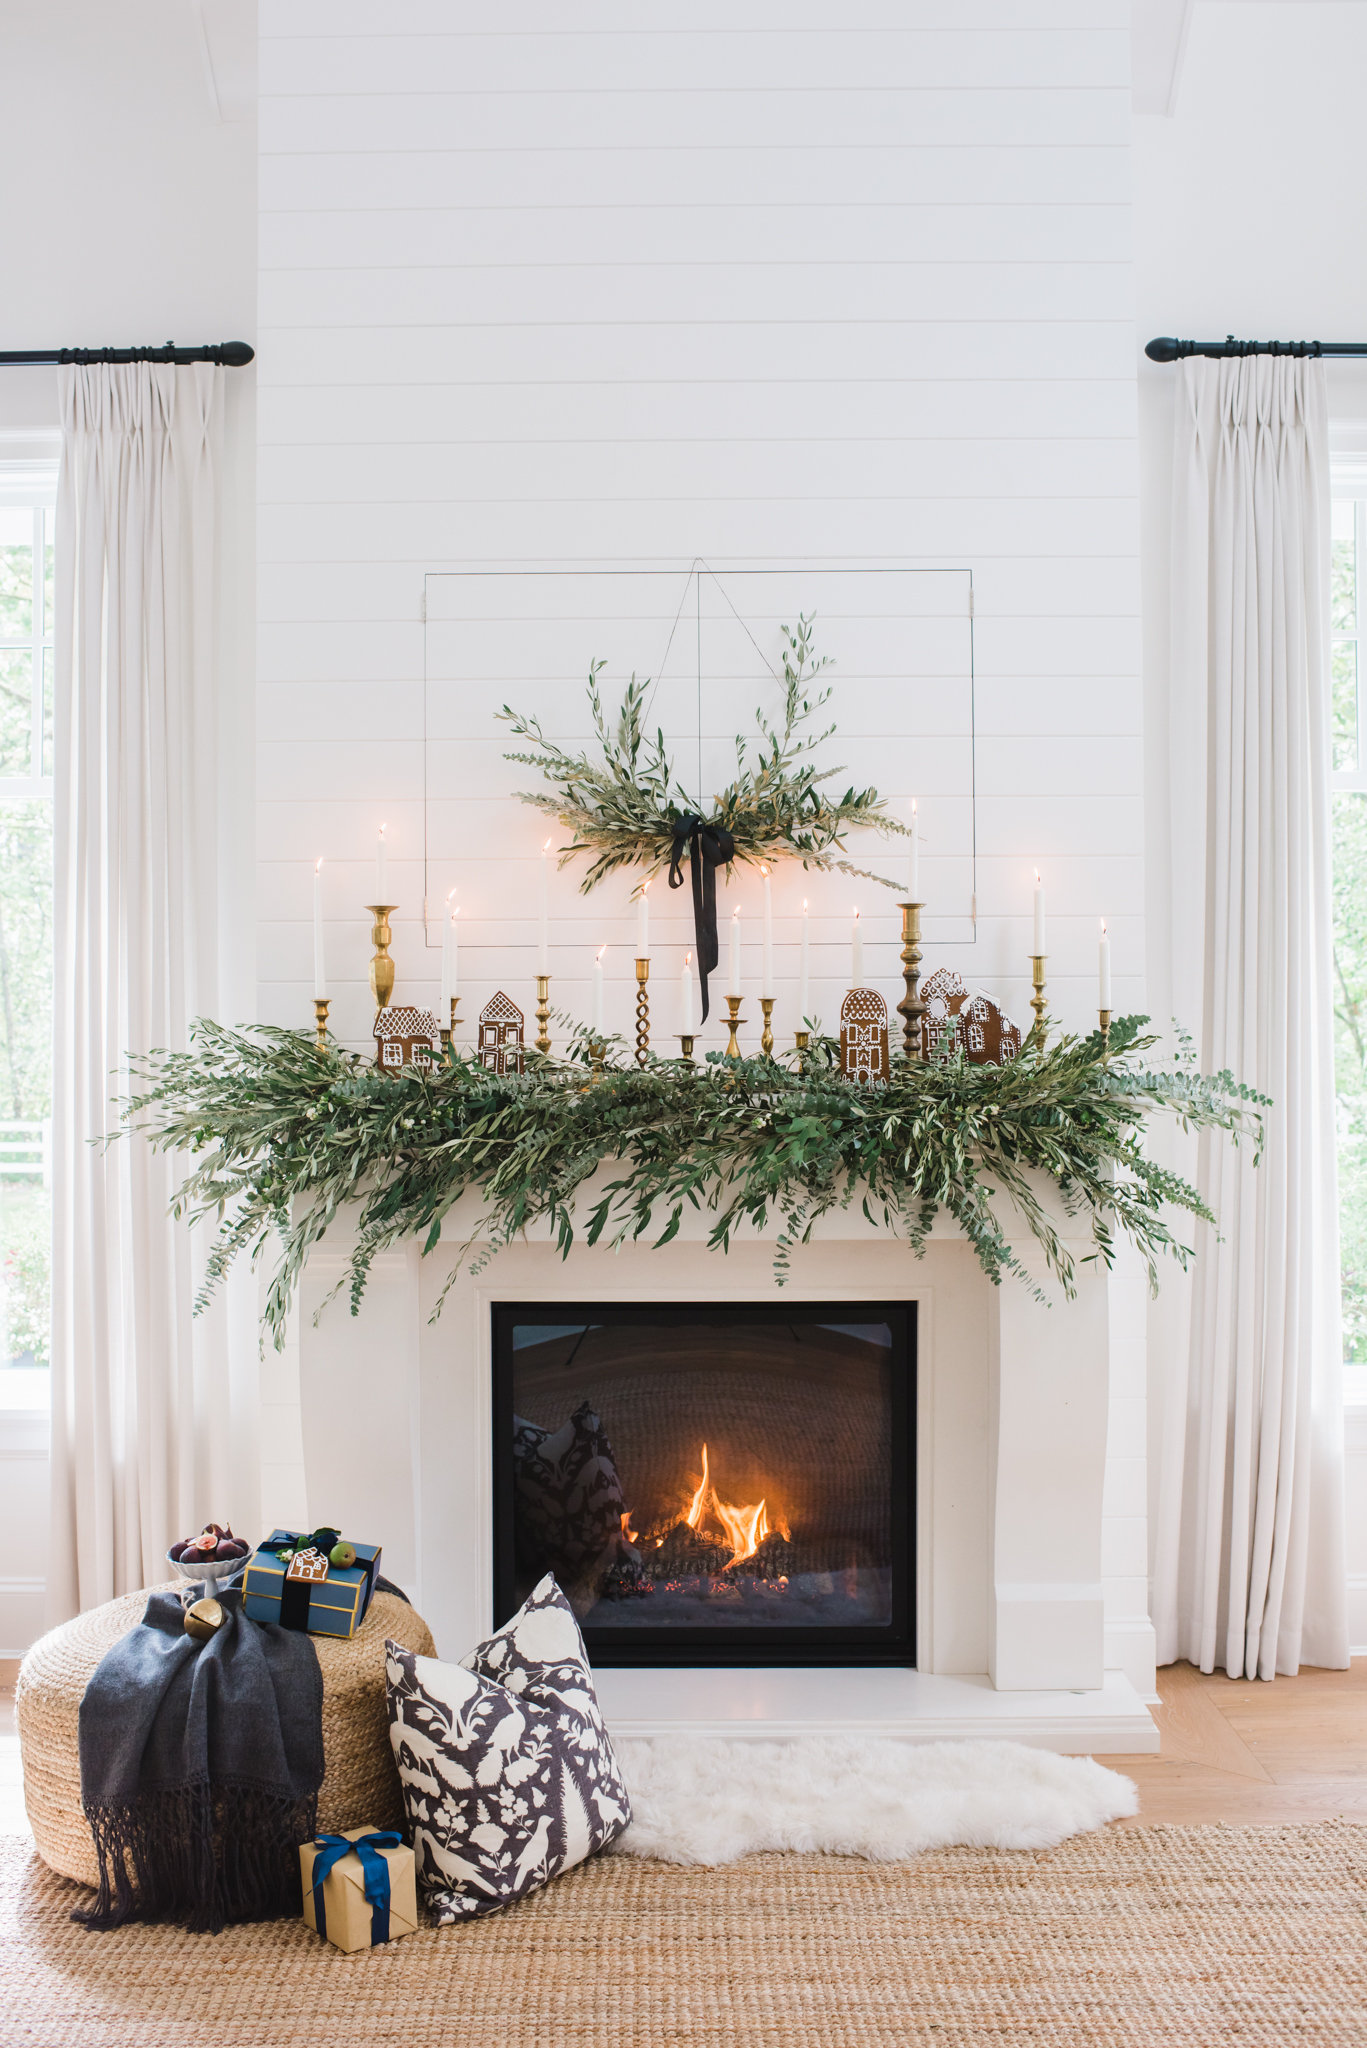 Love this cute little gingerbread house Christmas mantel with vintage brass candlesticks and the mix of greenery